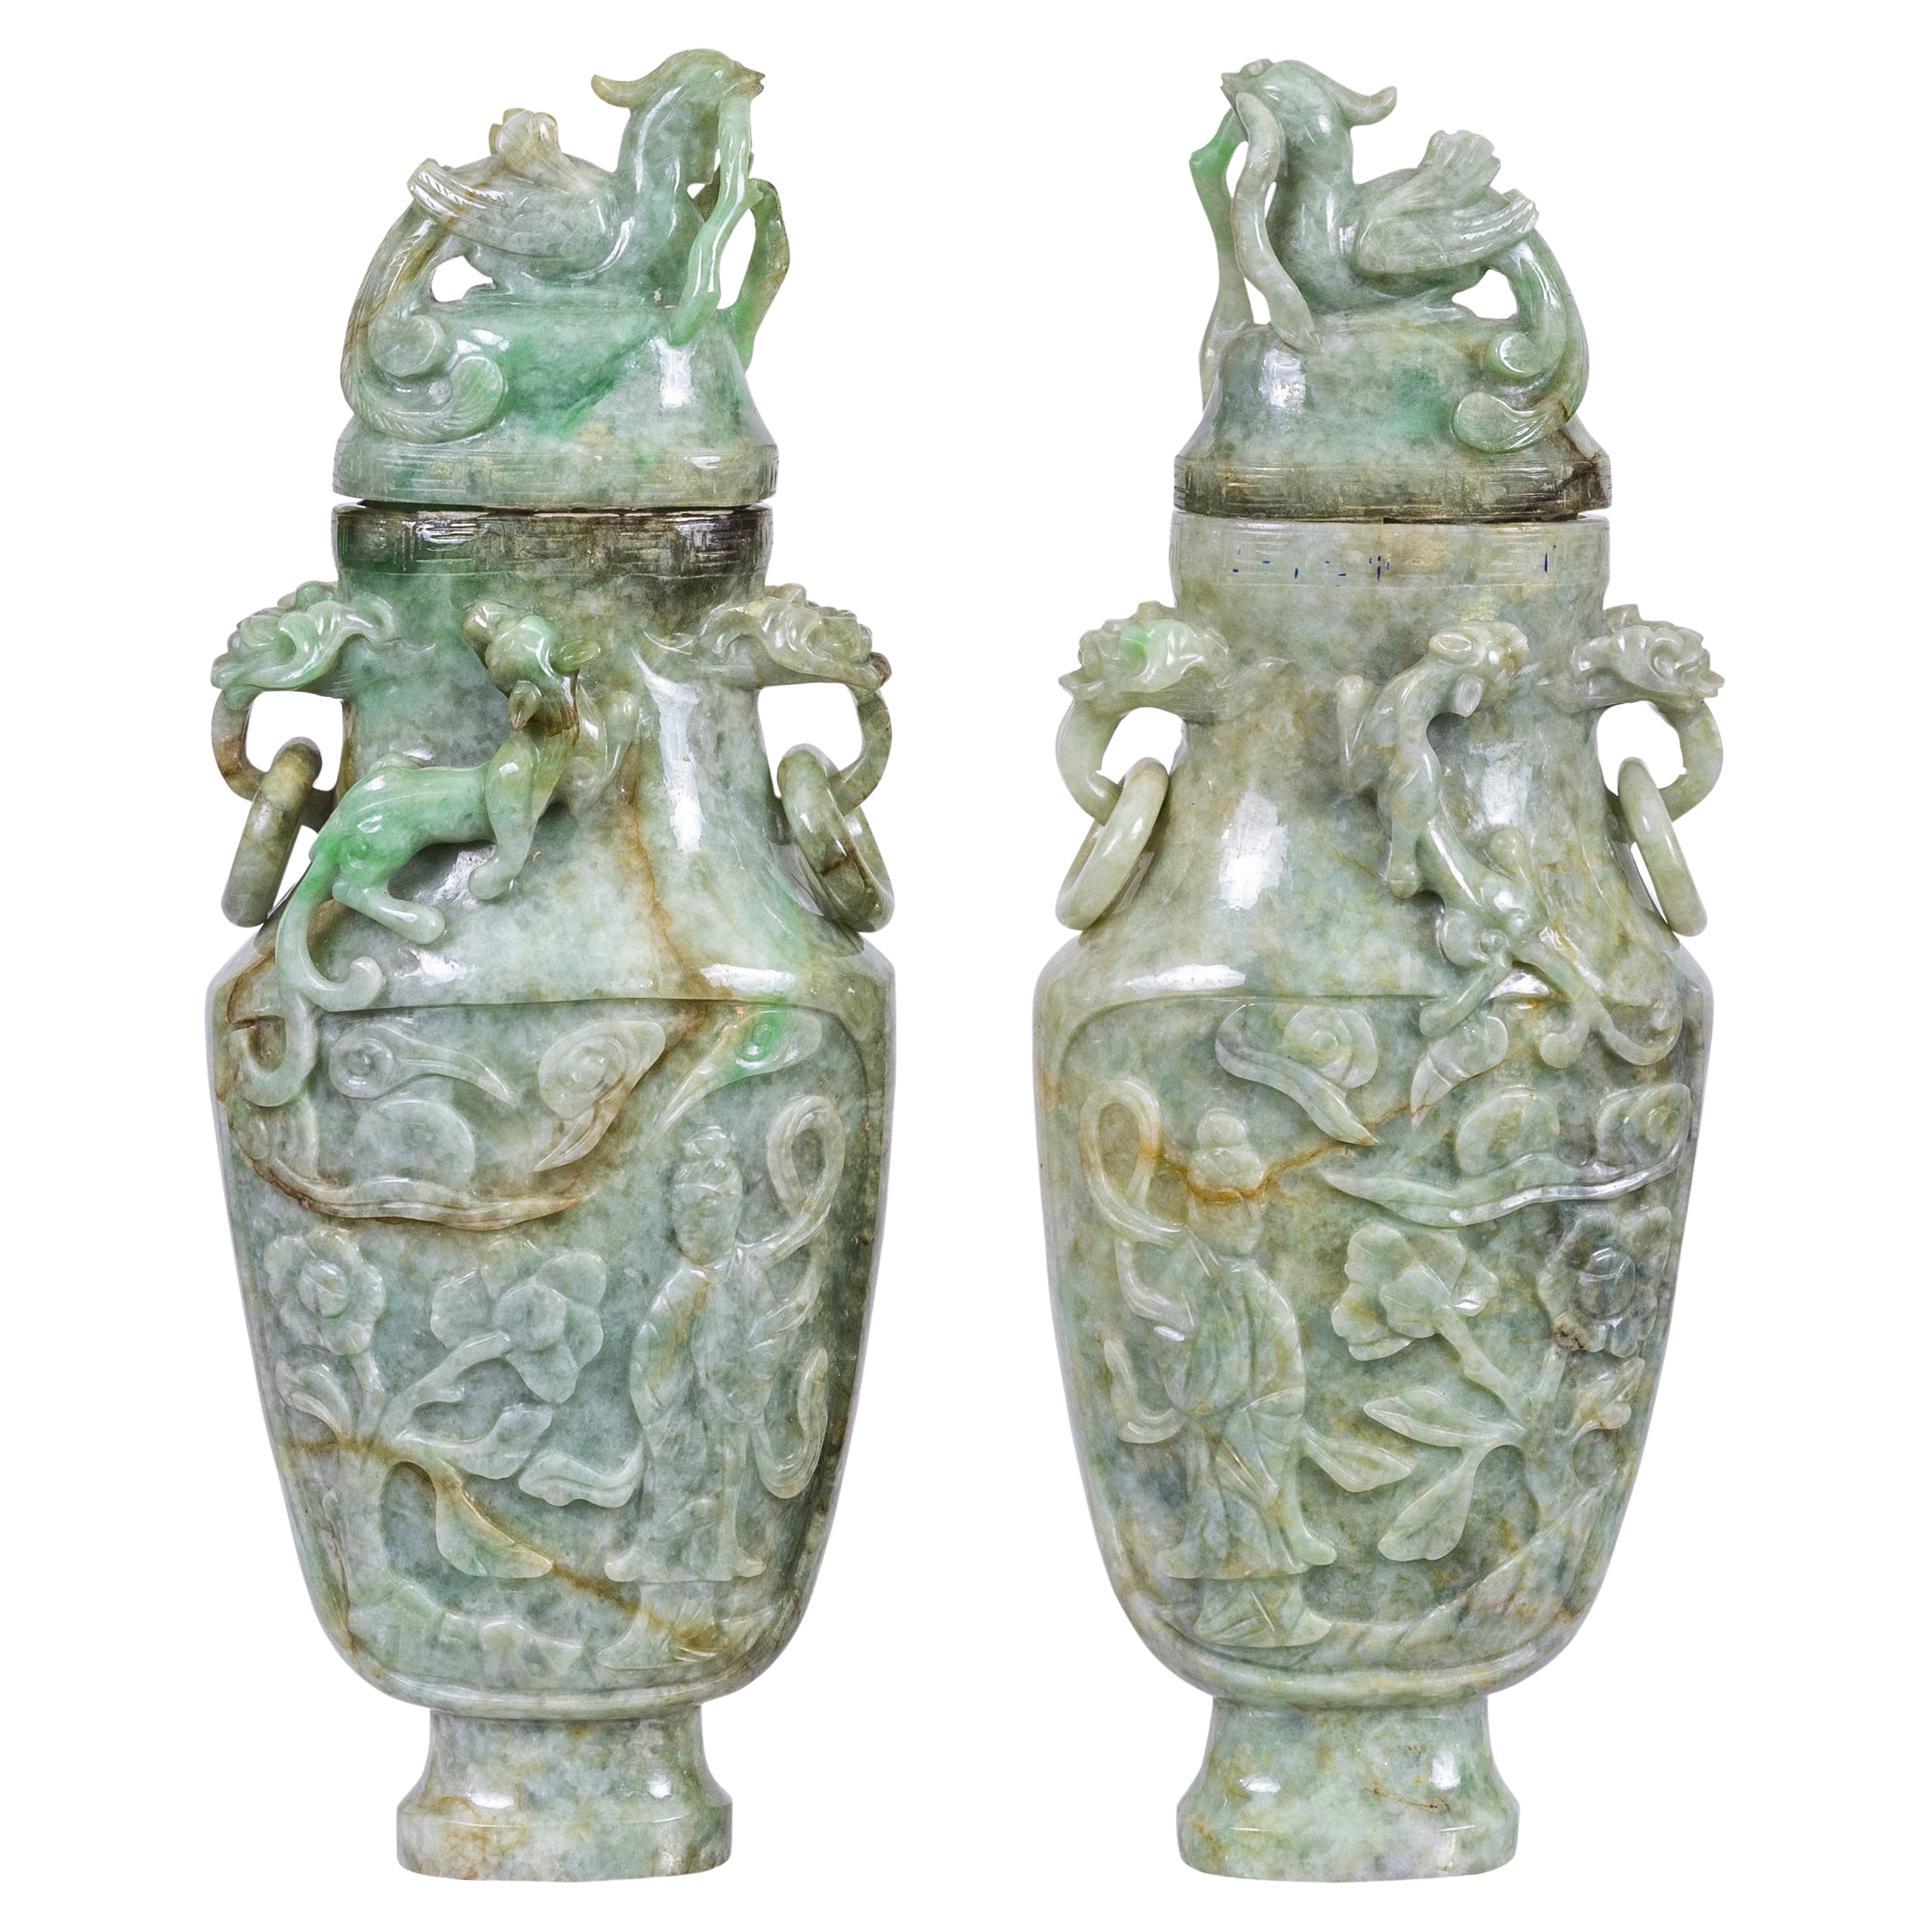 Pair of Chinese Carved Jadeite Archaistic Vases and Covers